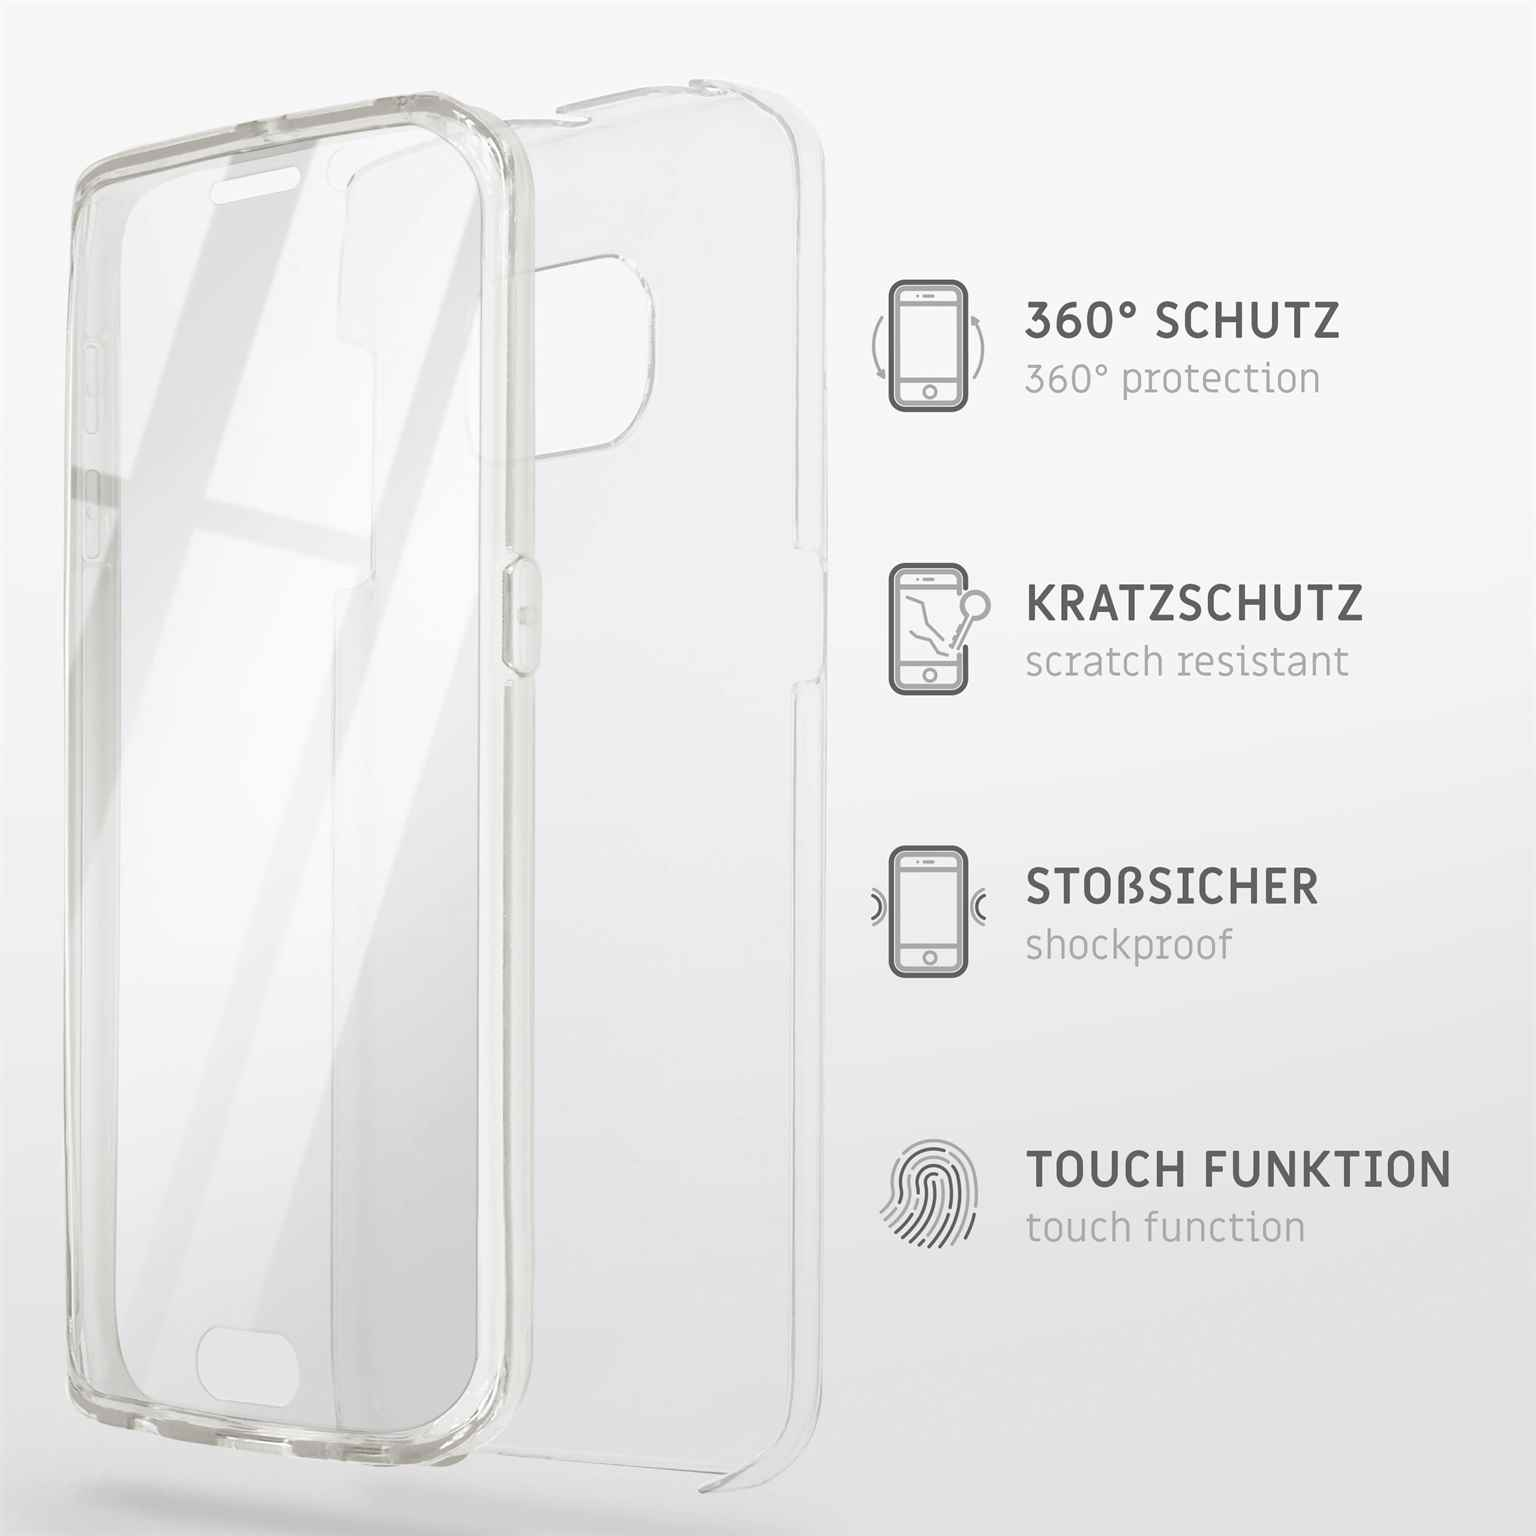 ONEFLOW Touch Case, Ultra-Clear Cover, Samsung, A71, Full Galaxy